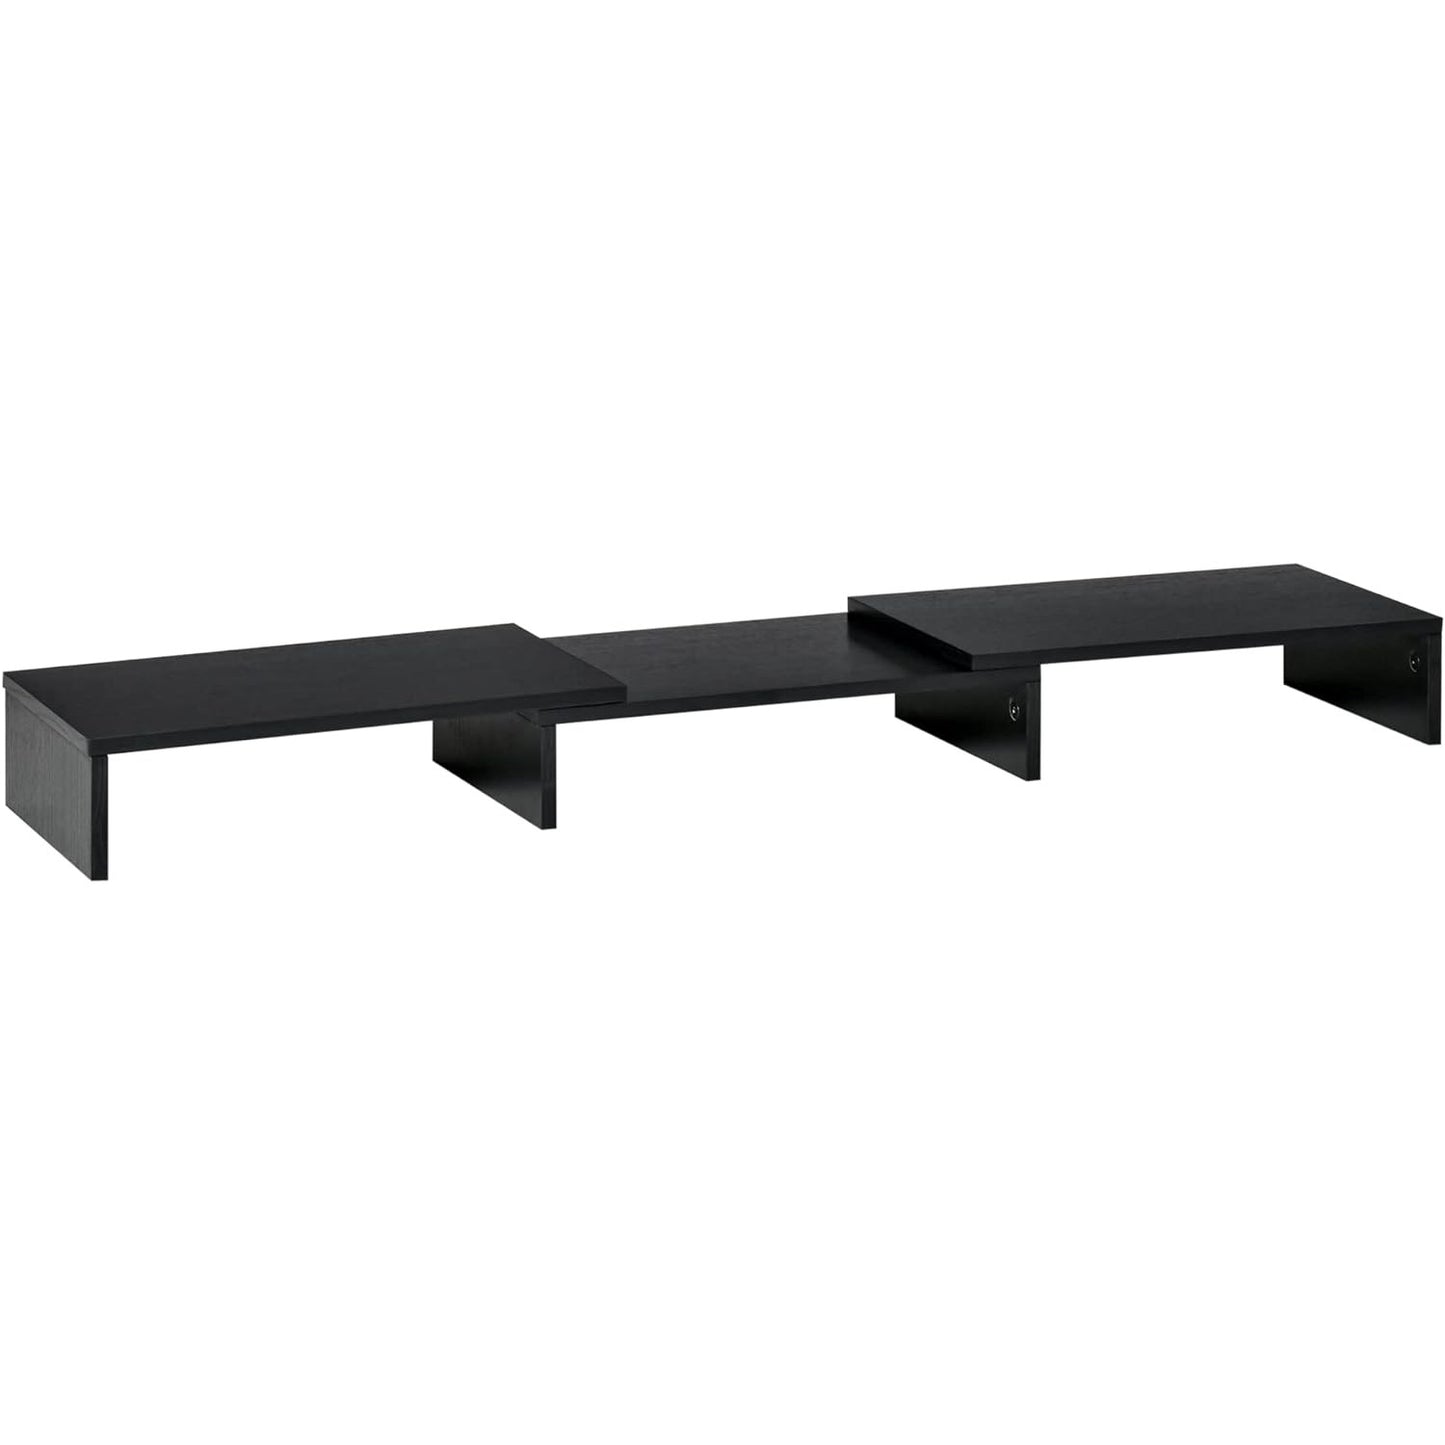 ProperAV Extra Dual Monitor Stand Riser with Adjustable Length & Angle - Black - maplin.co.uk